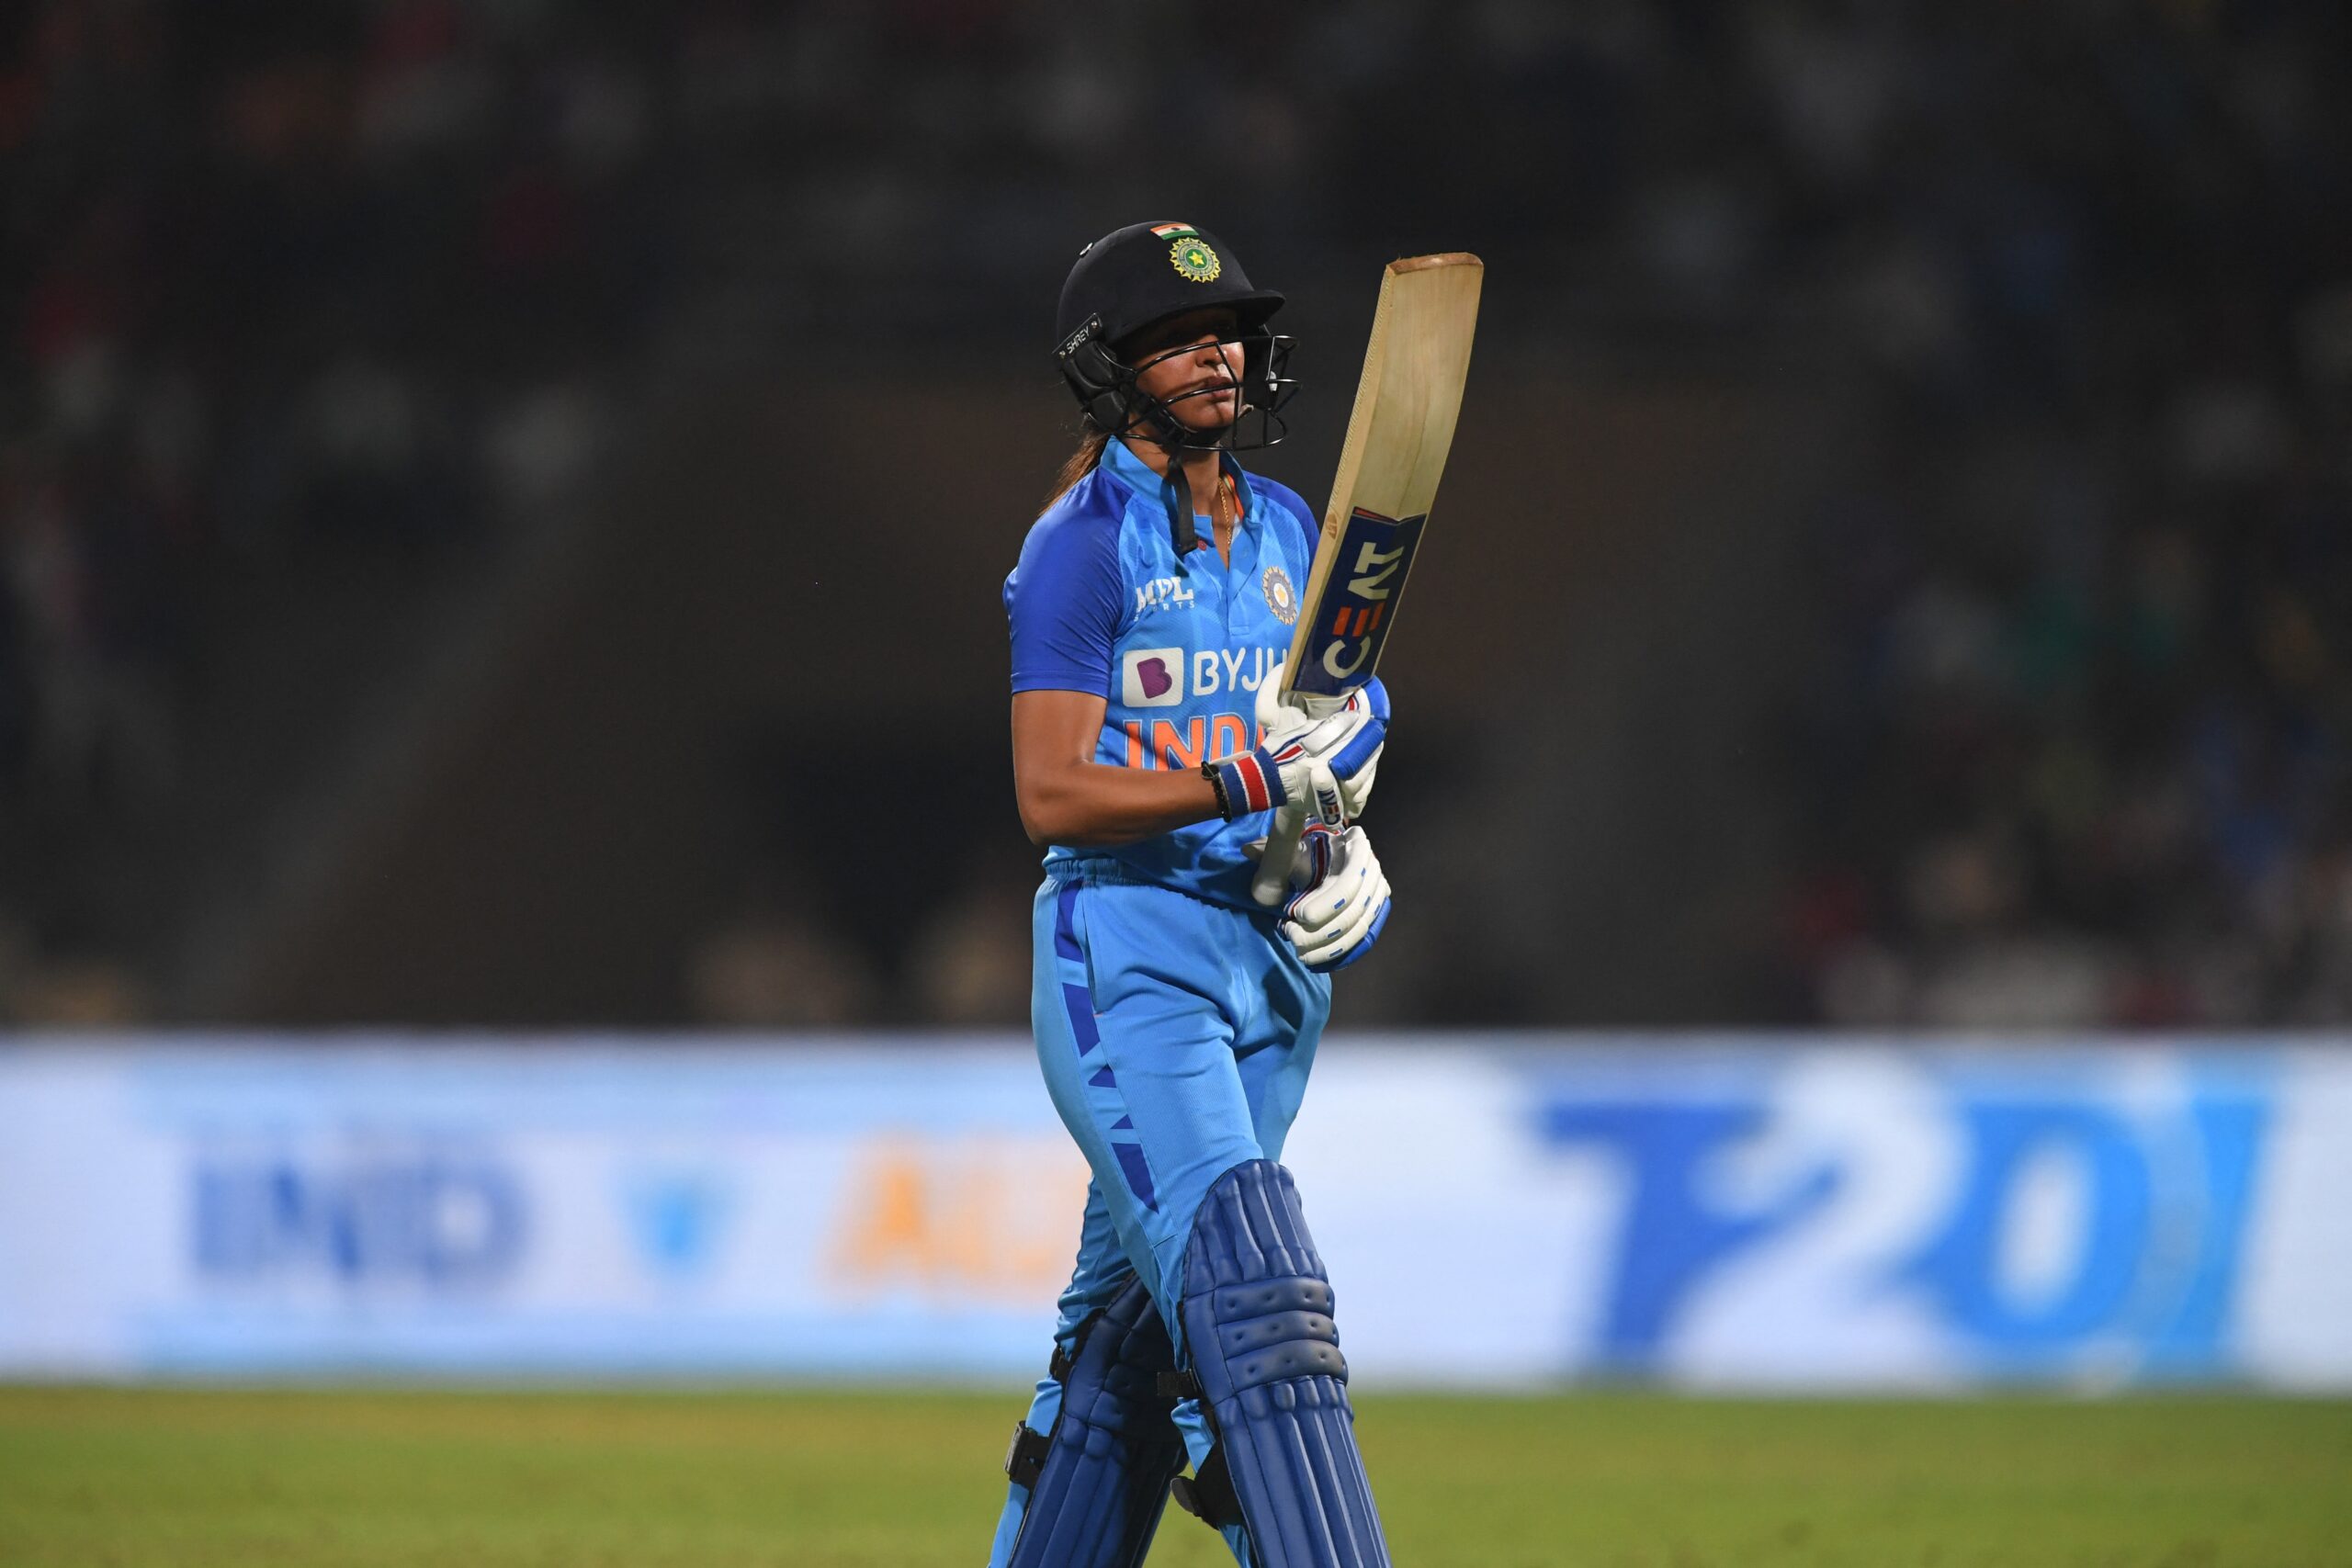 Harmanpreet Kaur Only Indian Player To Get Picked In Women’s Big Bash League Overseas Draft